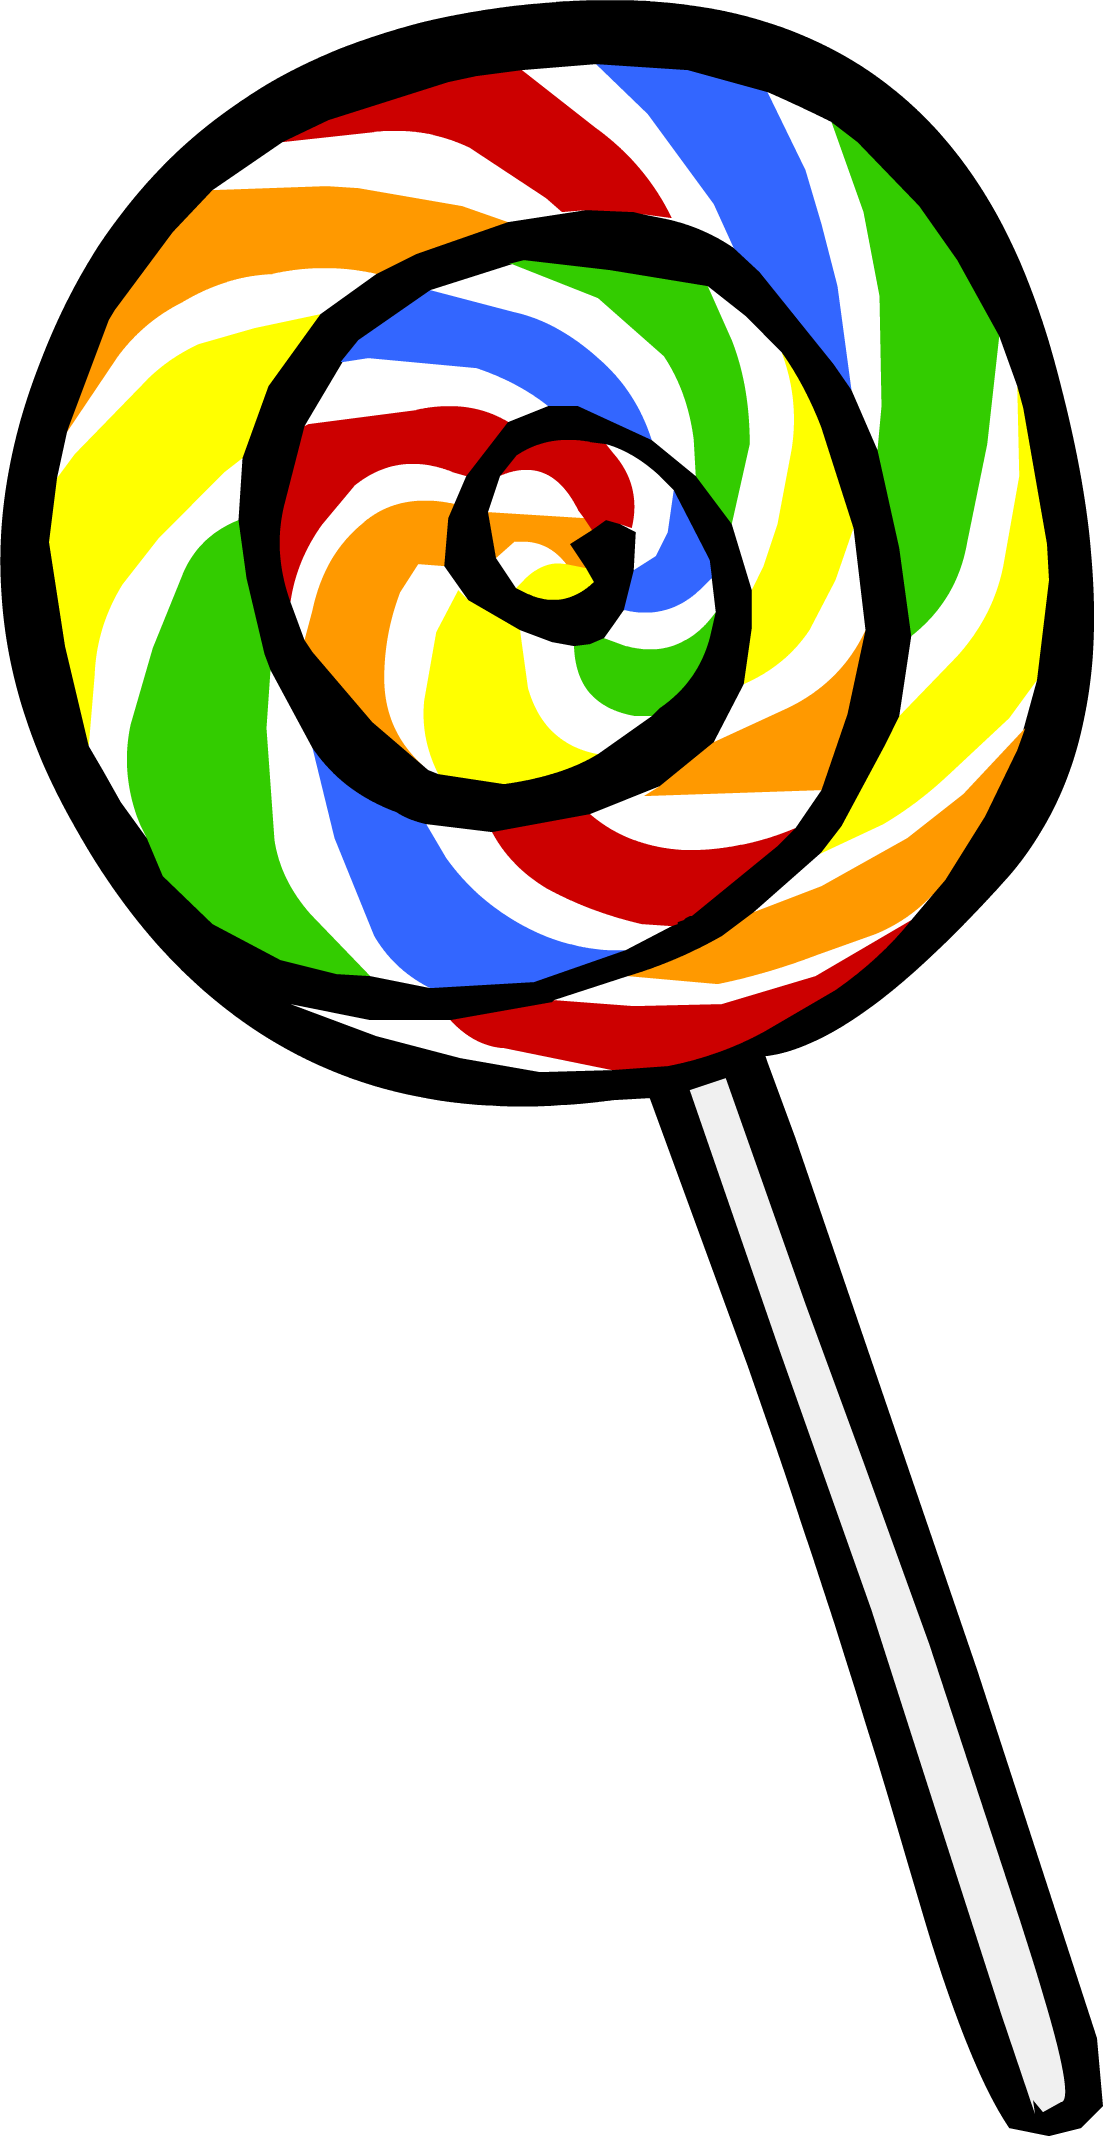 Lollipop Candy HD Image Free PNG Image